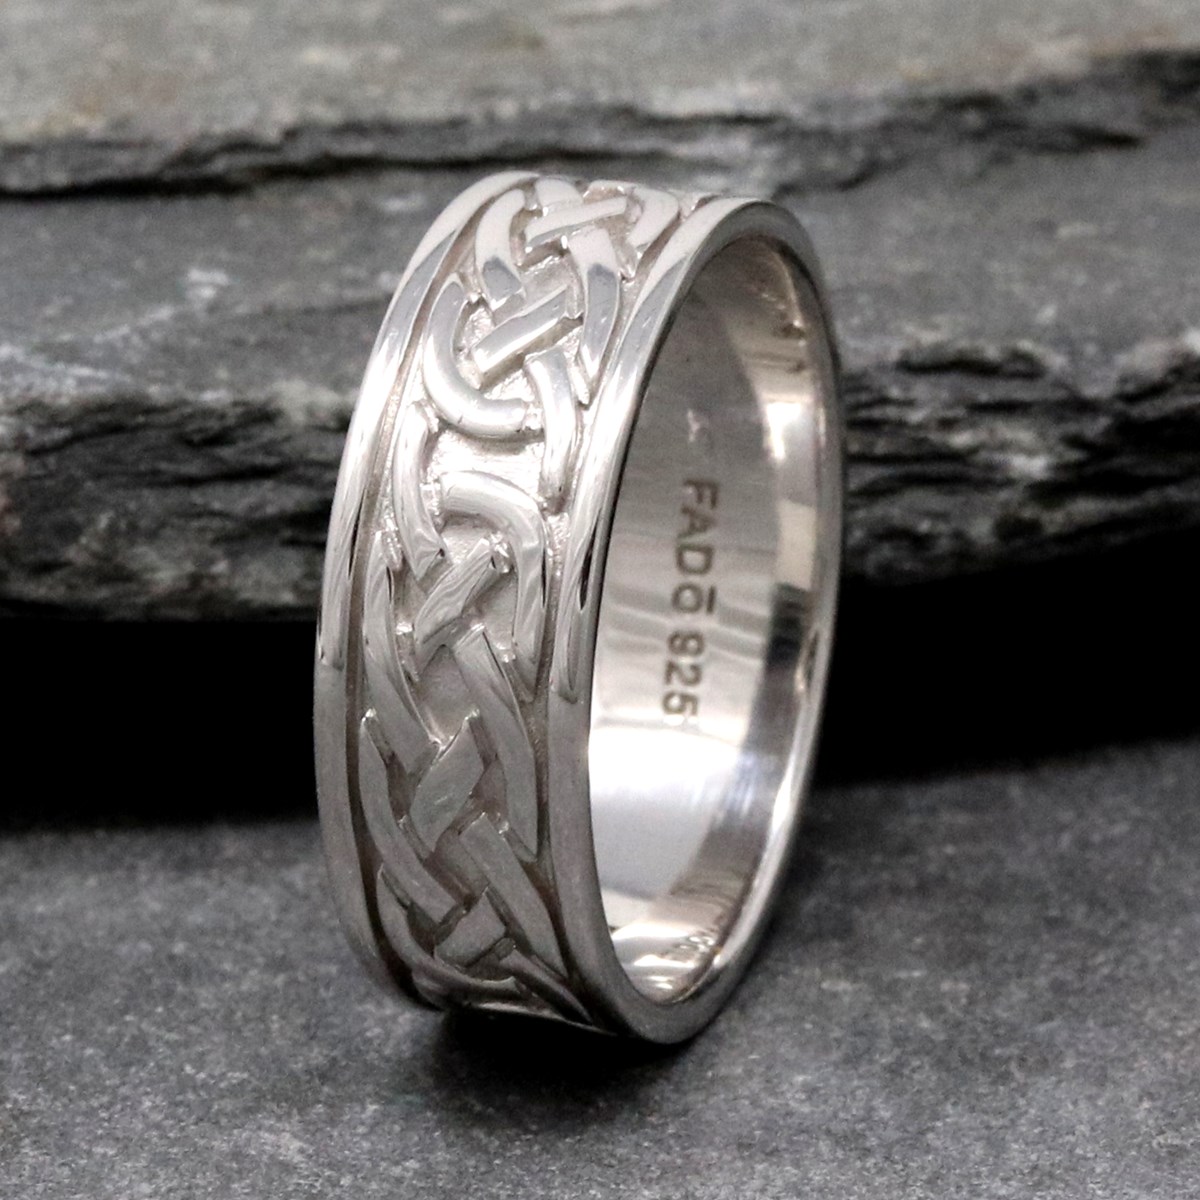 Celtic Knot Silver Wedding Band - Celtic Wedding Rings - Rings from Ireland